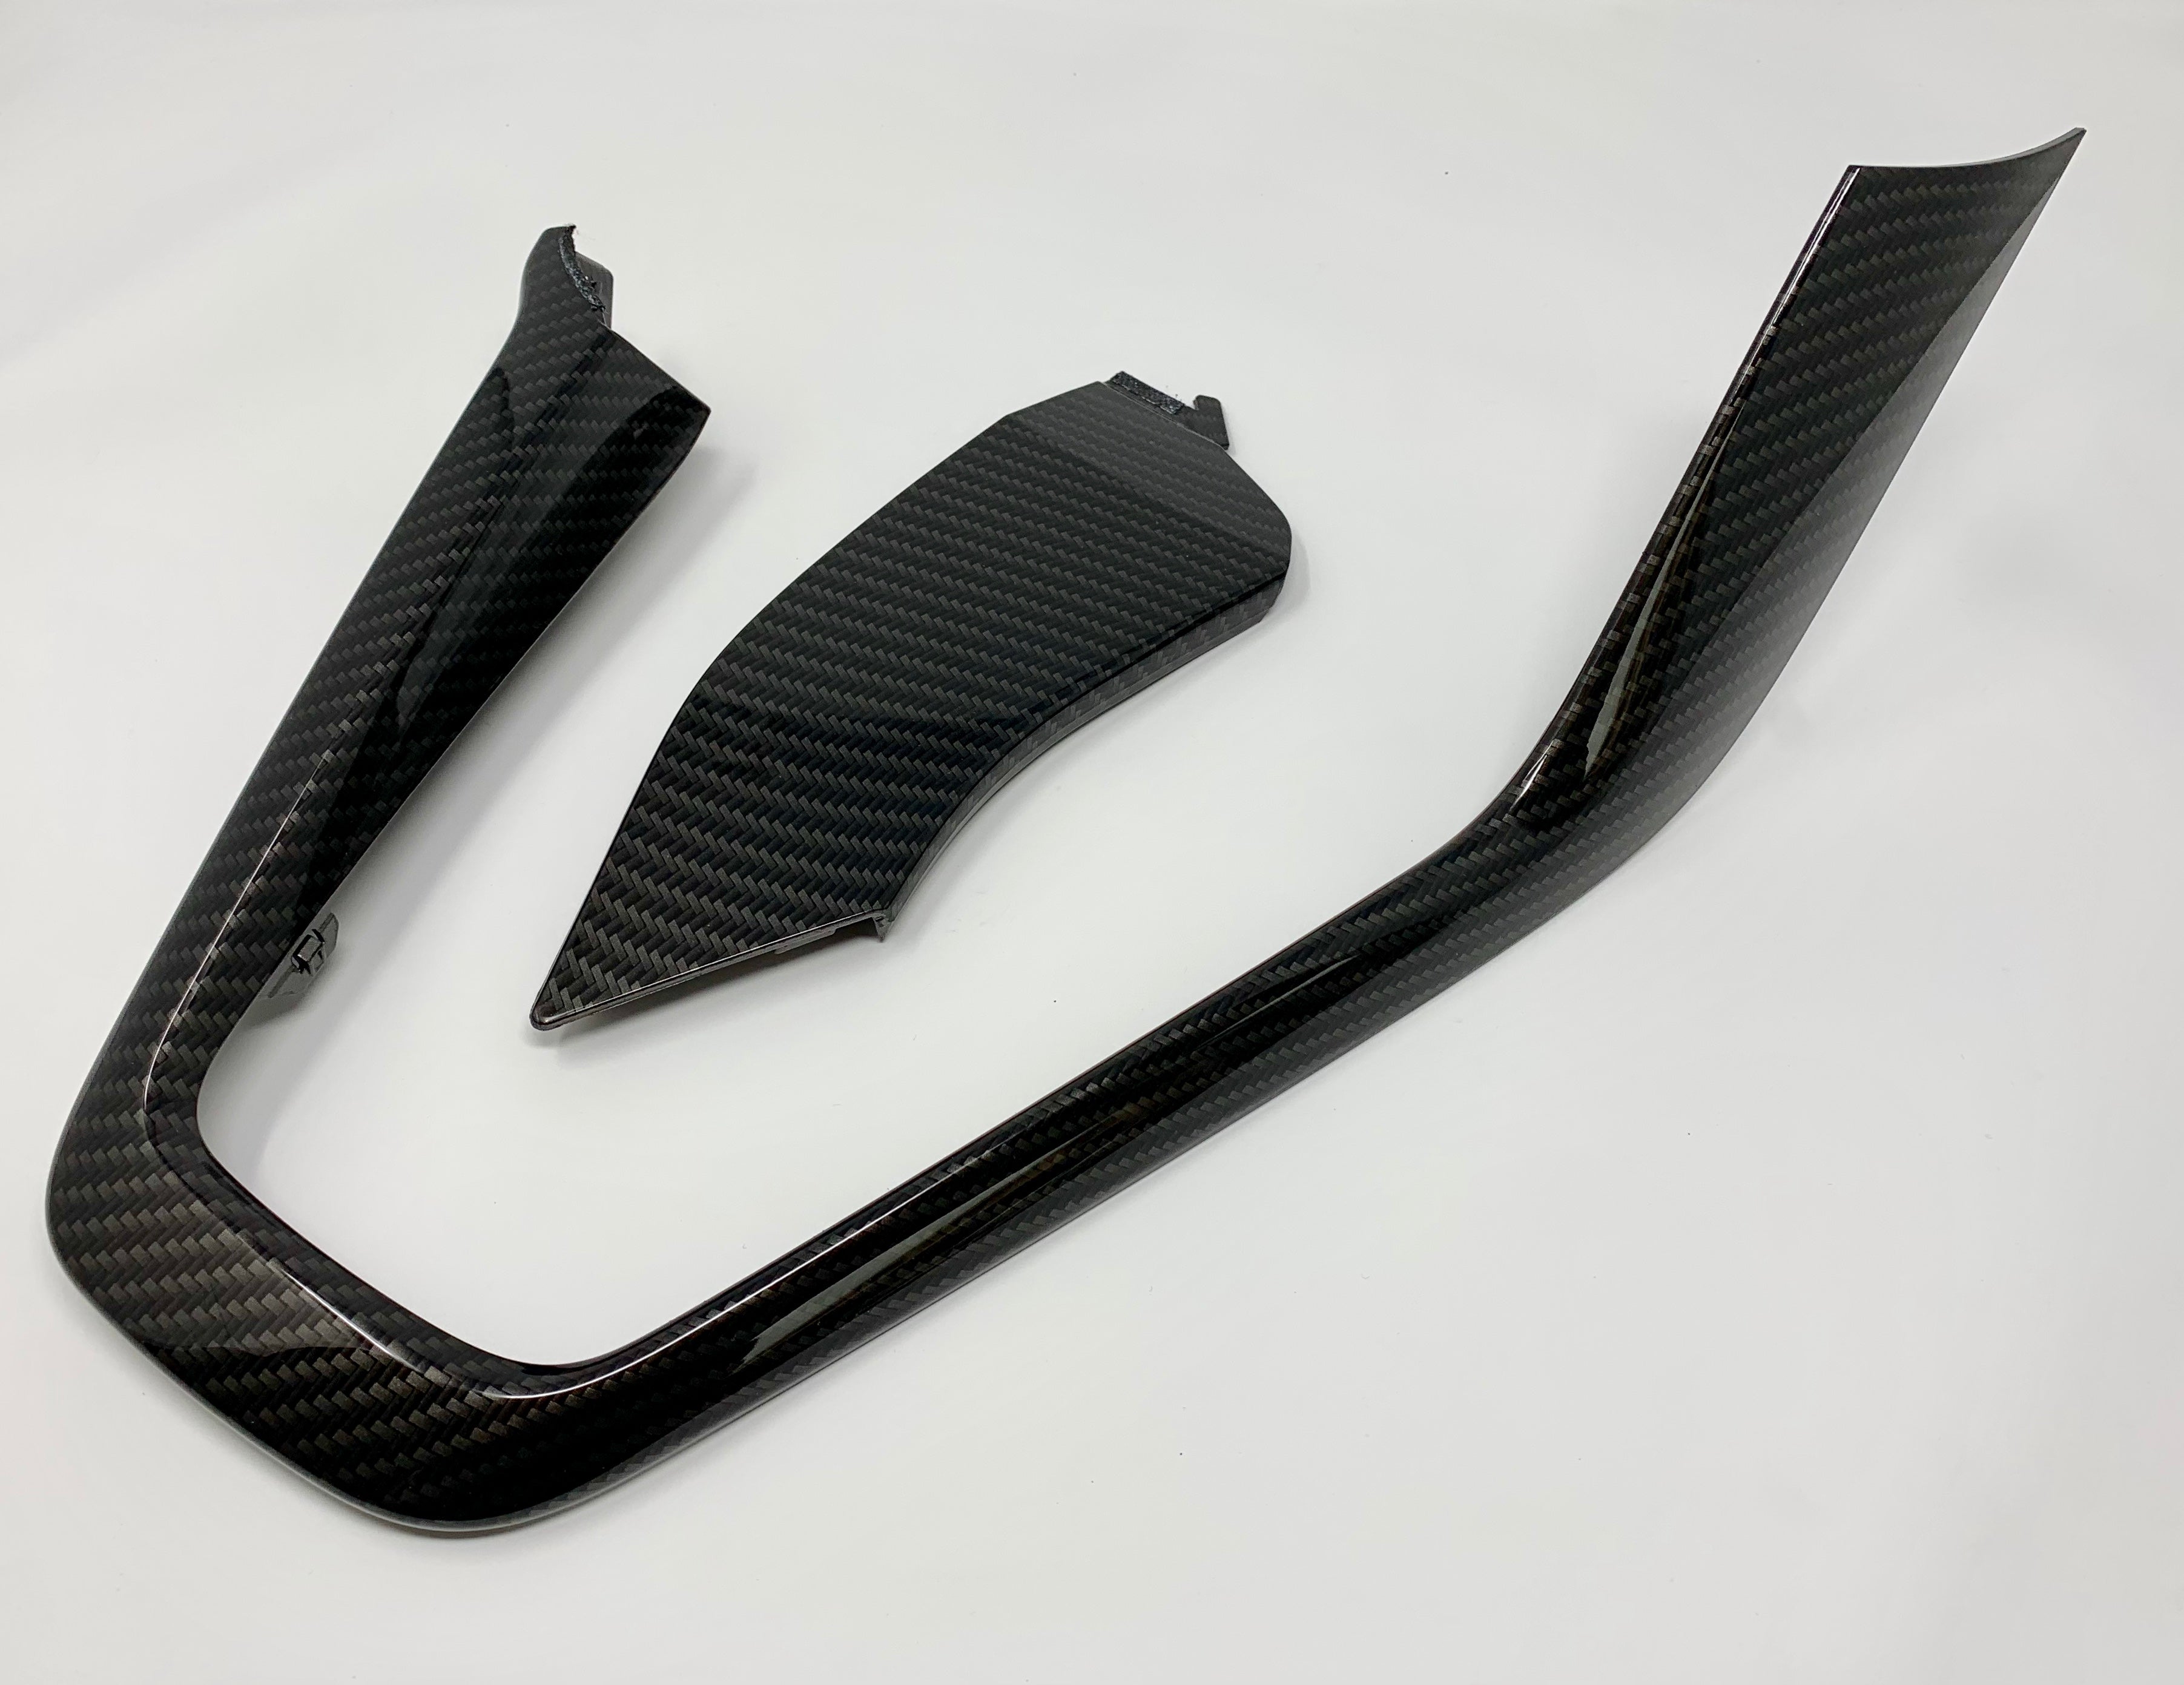 Genuine Ford Centre Console Edge Trim and Side Return - MK3.5 Focus (Painted/Hydrodipped Finishes)